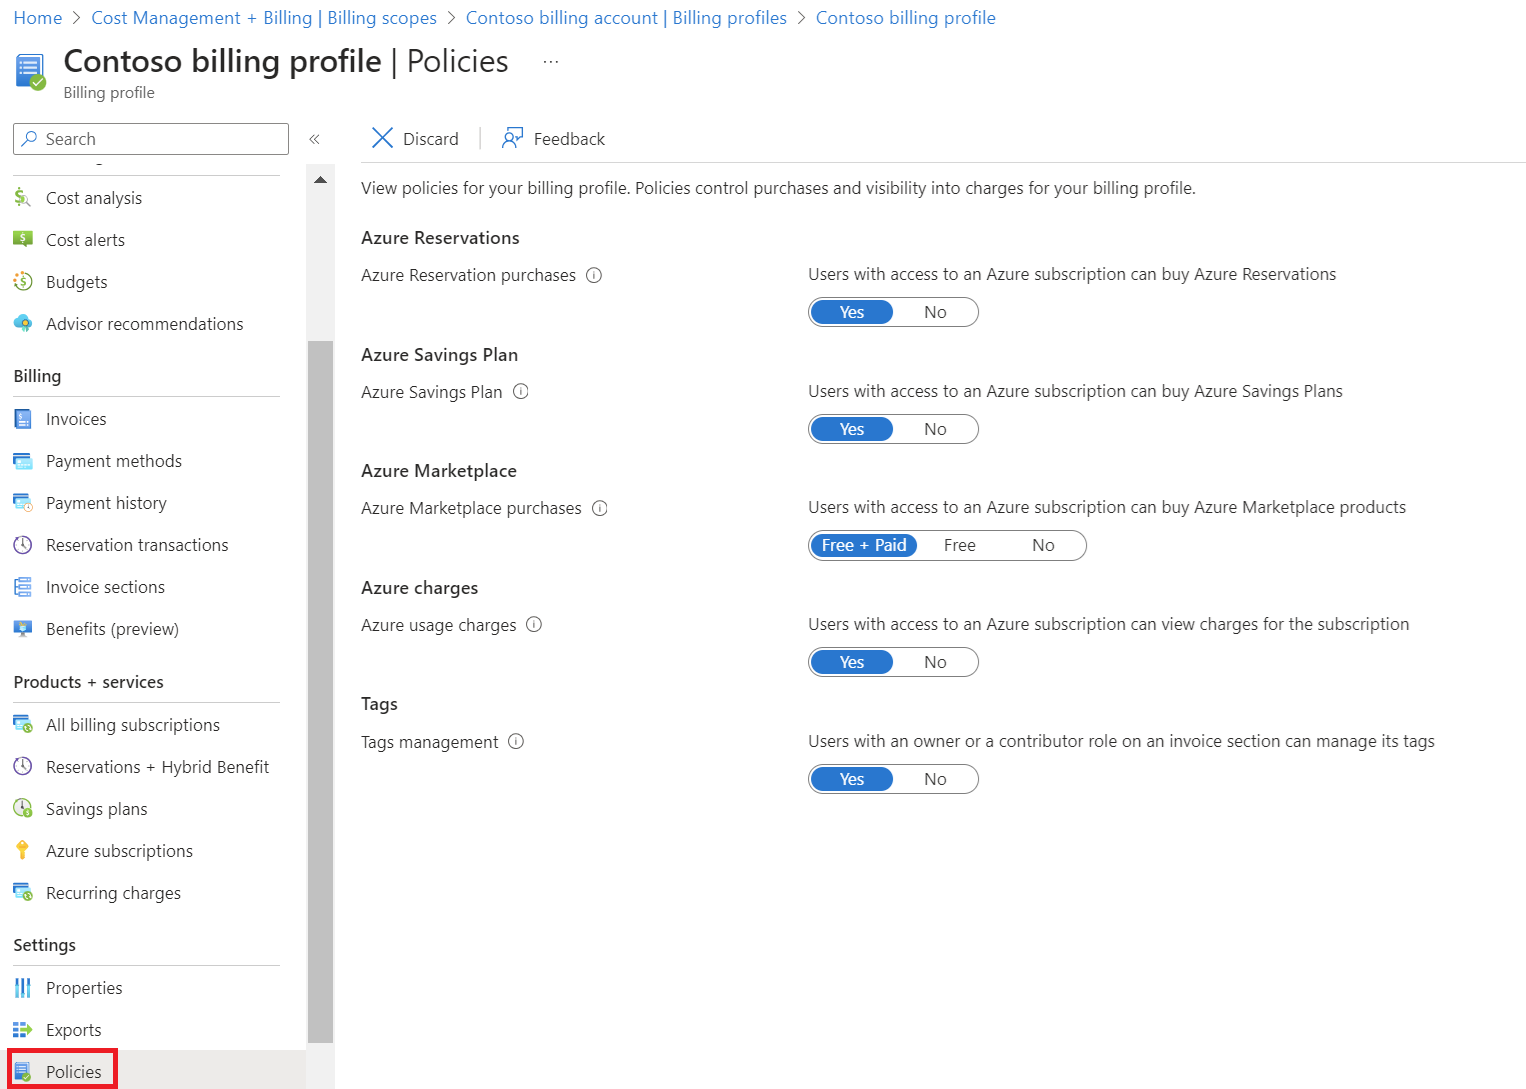 Screenshot showing the billing profile Policies page and options.